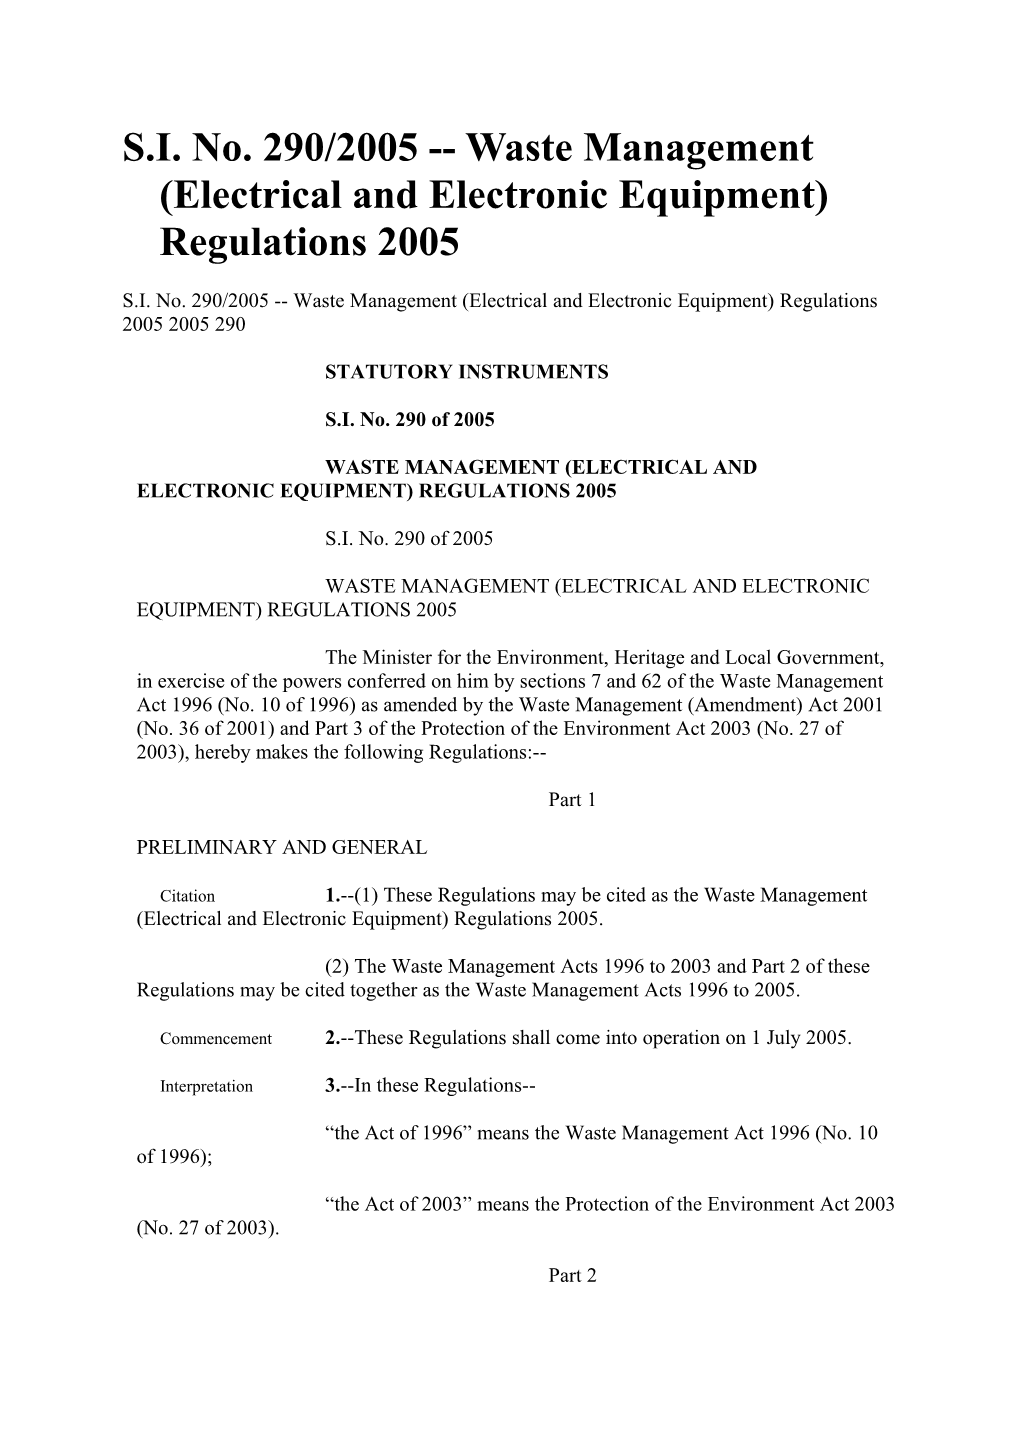 S.I. No. 290/2005 Waste Management (Electrical and Electronic Equipment) Regulations 2005